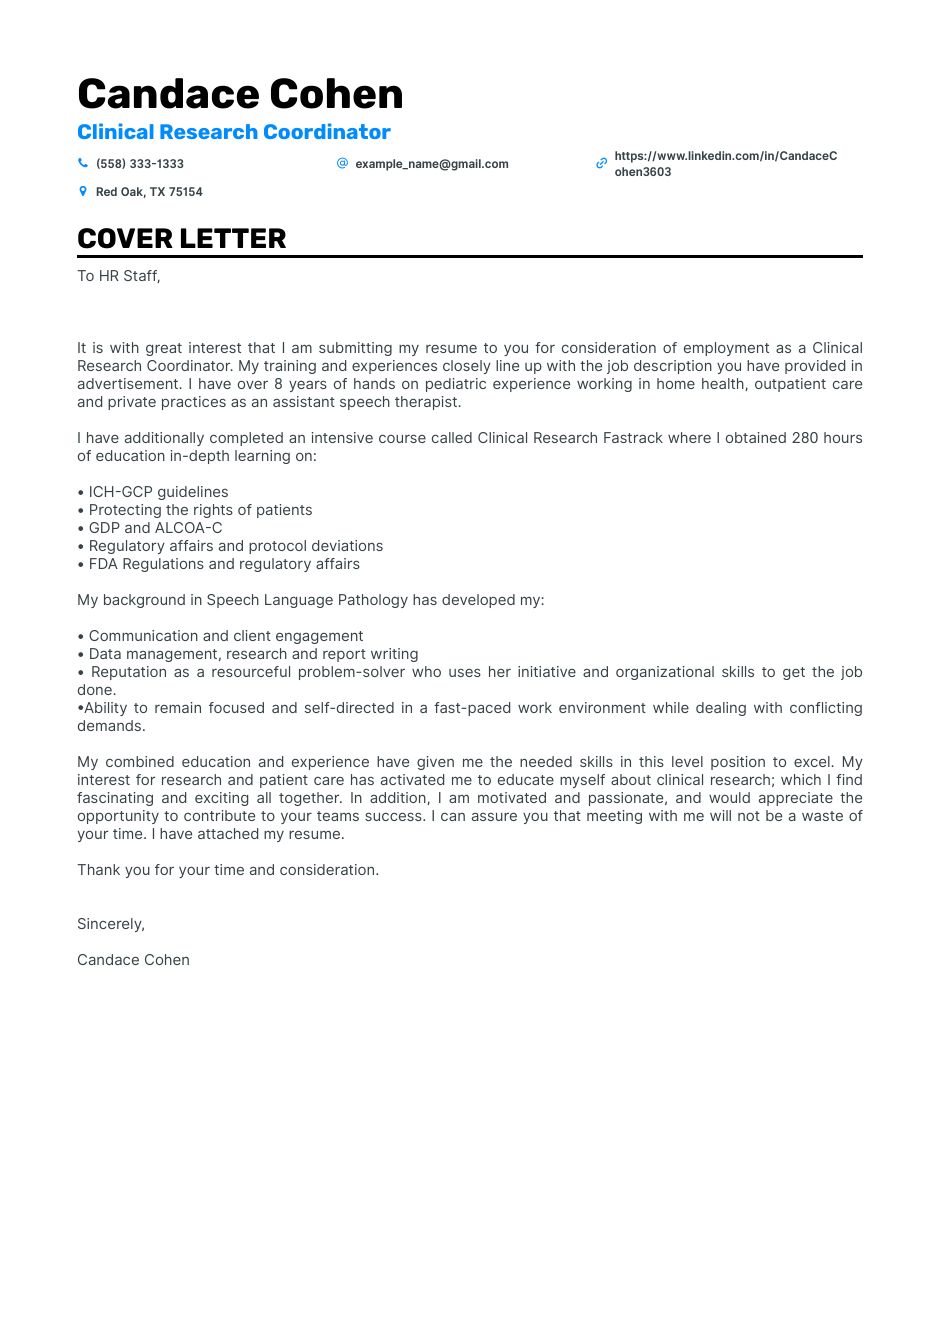 clinical-research-coordinator-coverletter.png